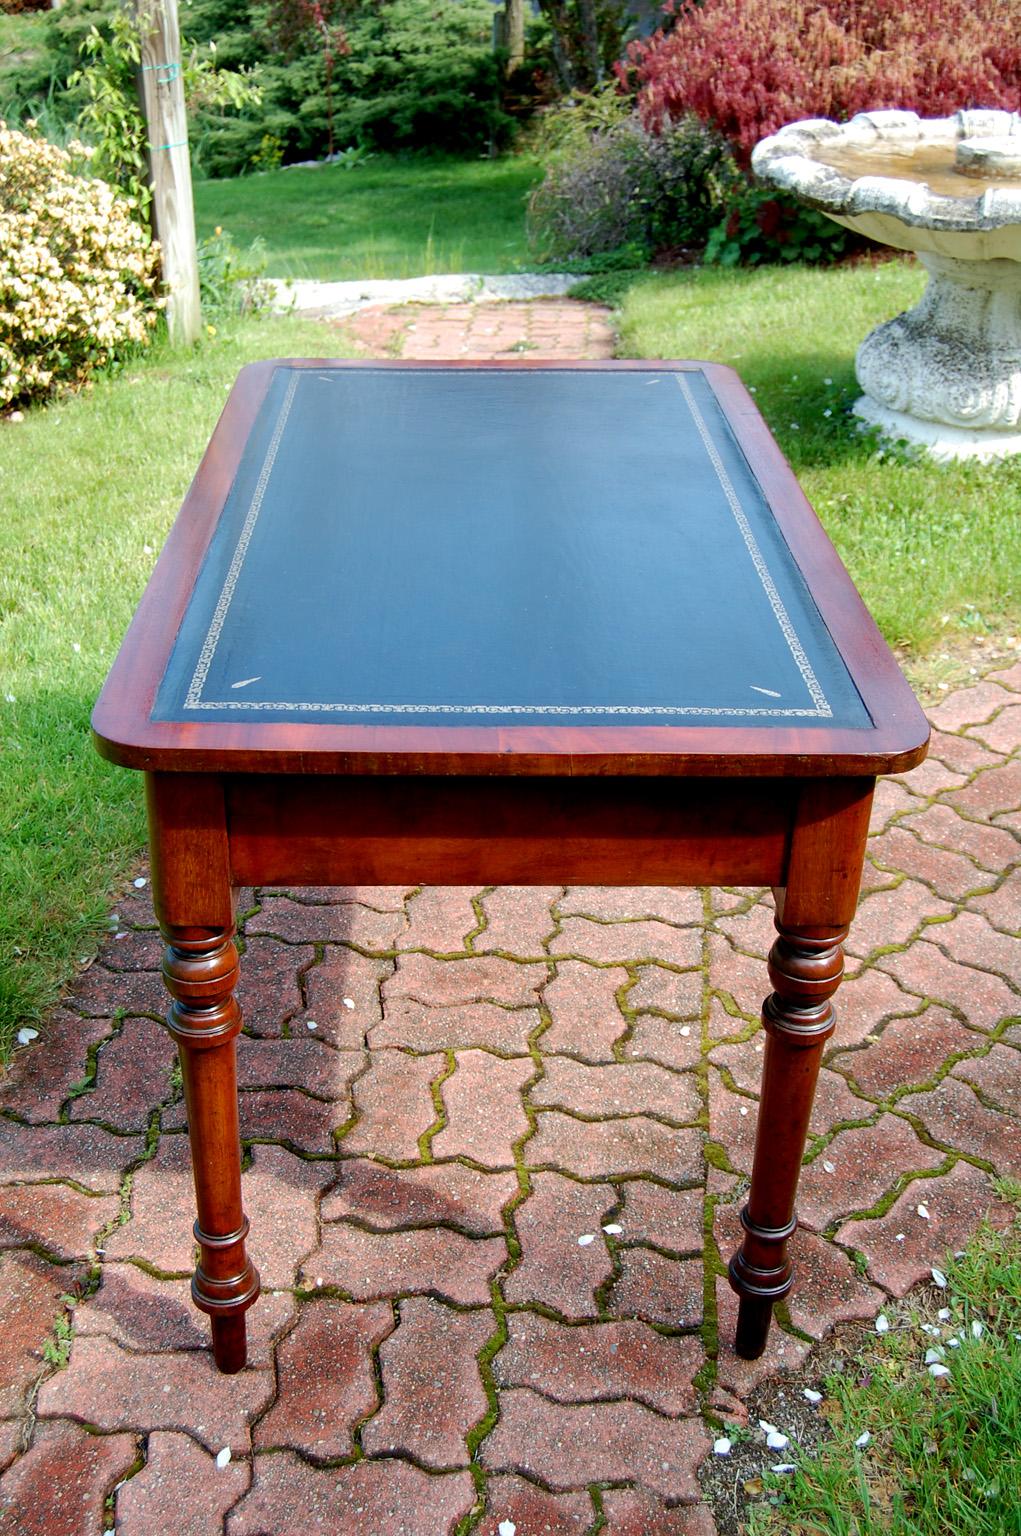 Early Victorian English Mid 19th Century Mahogany Writing Table with Tooled Leather, Turned Legs